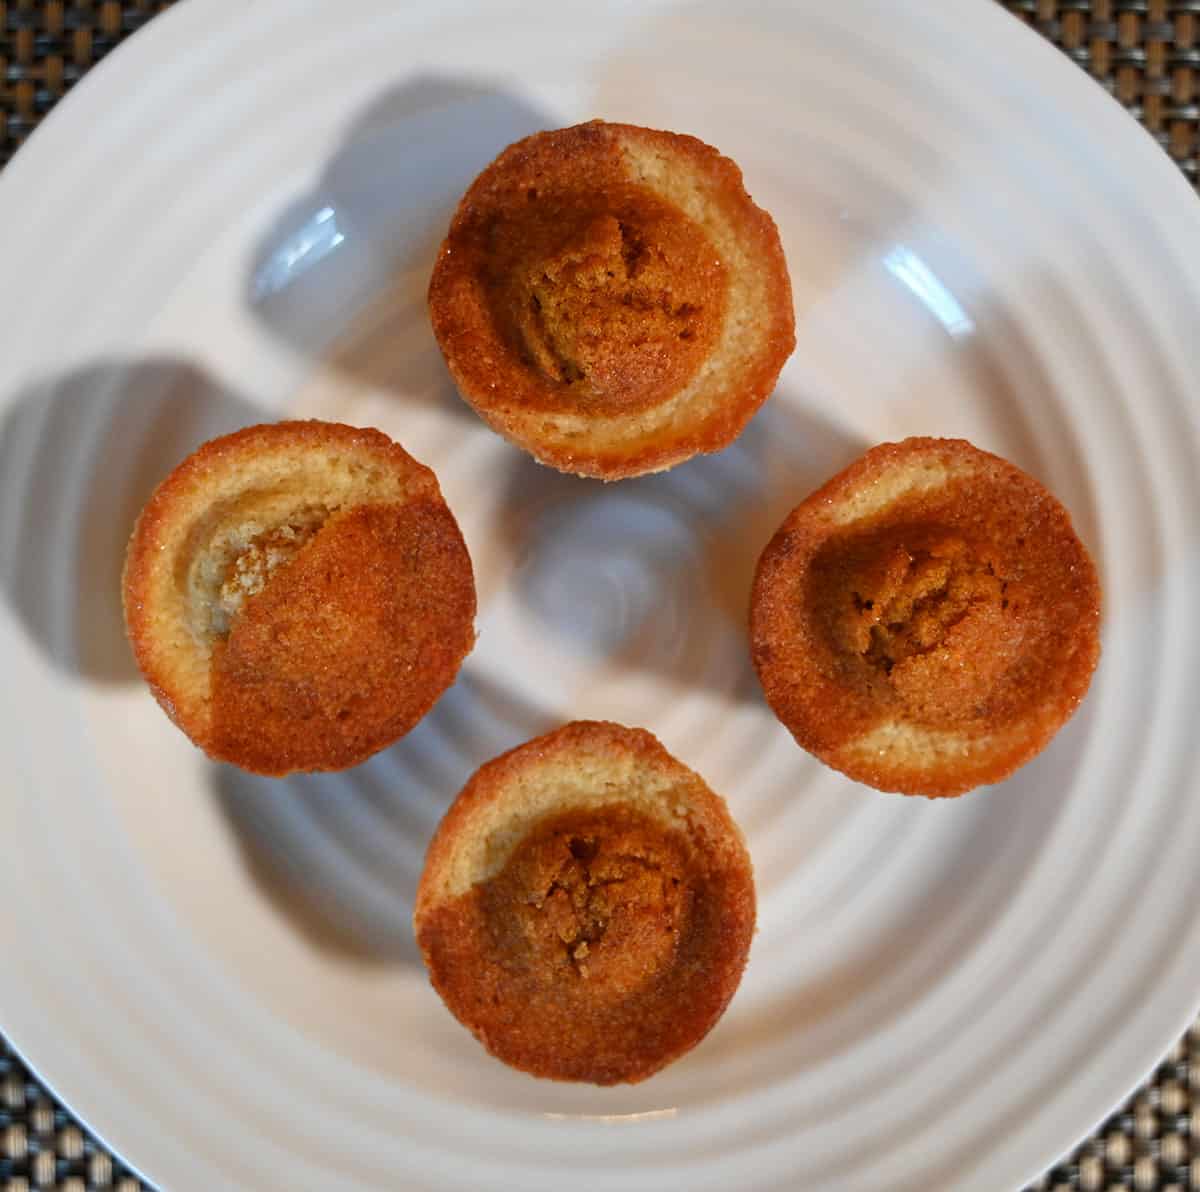 Four Costco Sugar Bowl Bakery Carrot Cake Bites on a white plate, top down image.